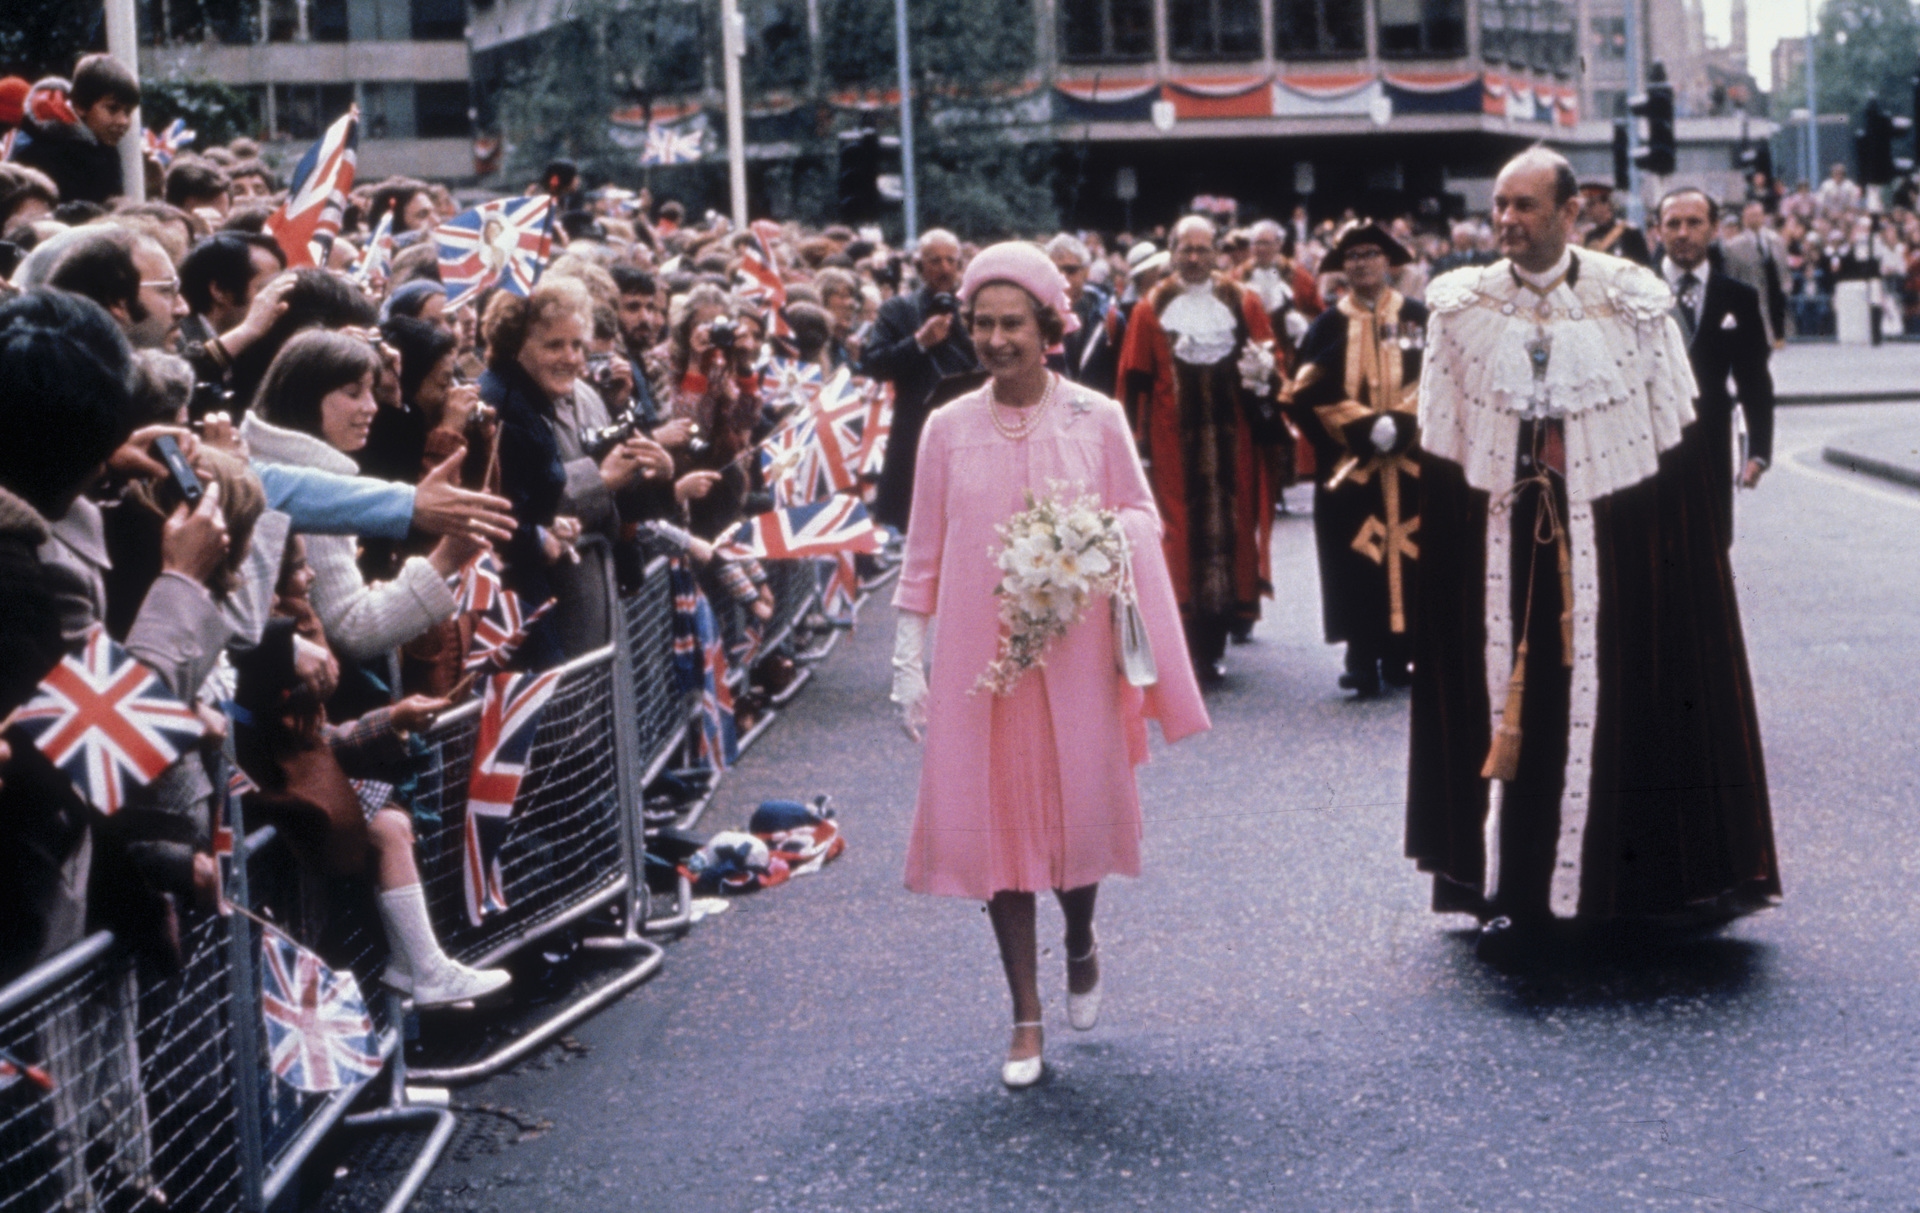 Queen Elizabeth II is greeted by crowds in London while celebrating her Silver Jubilee in 1977.